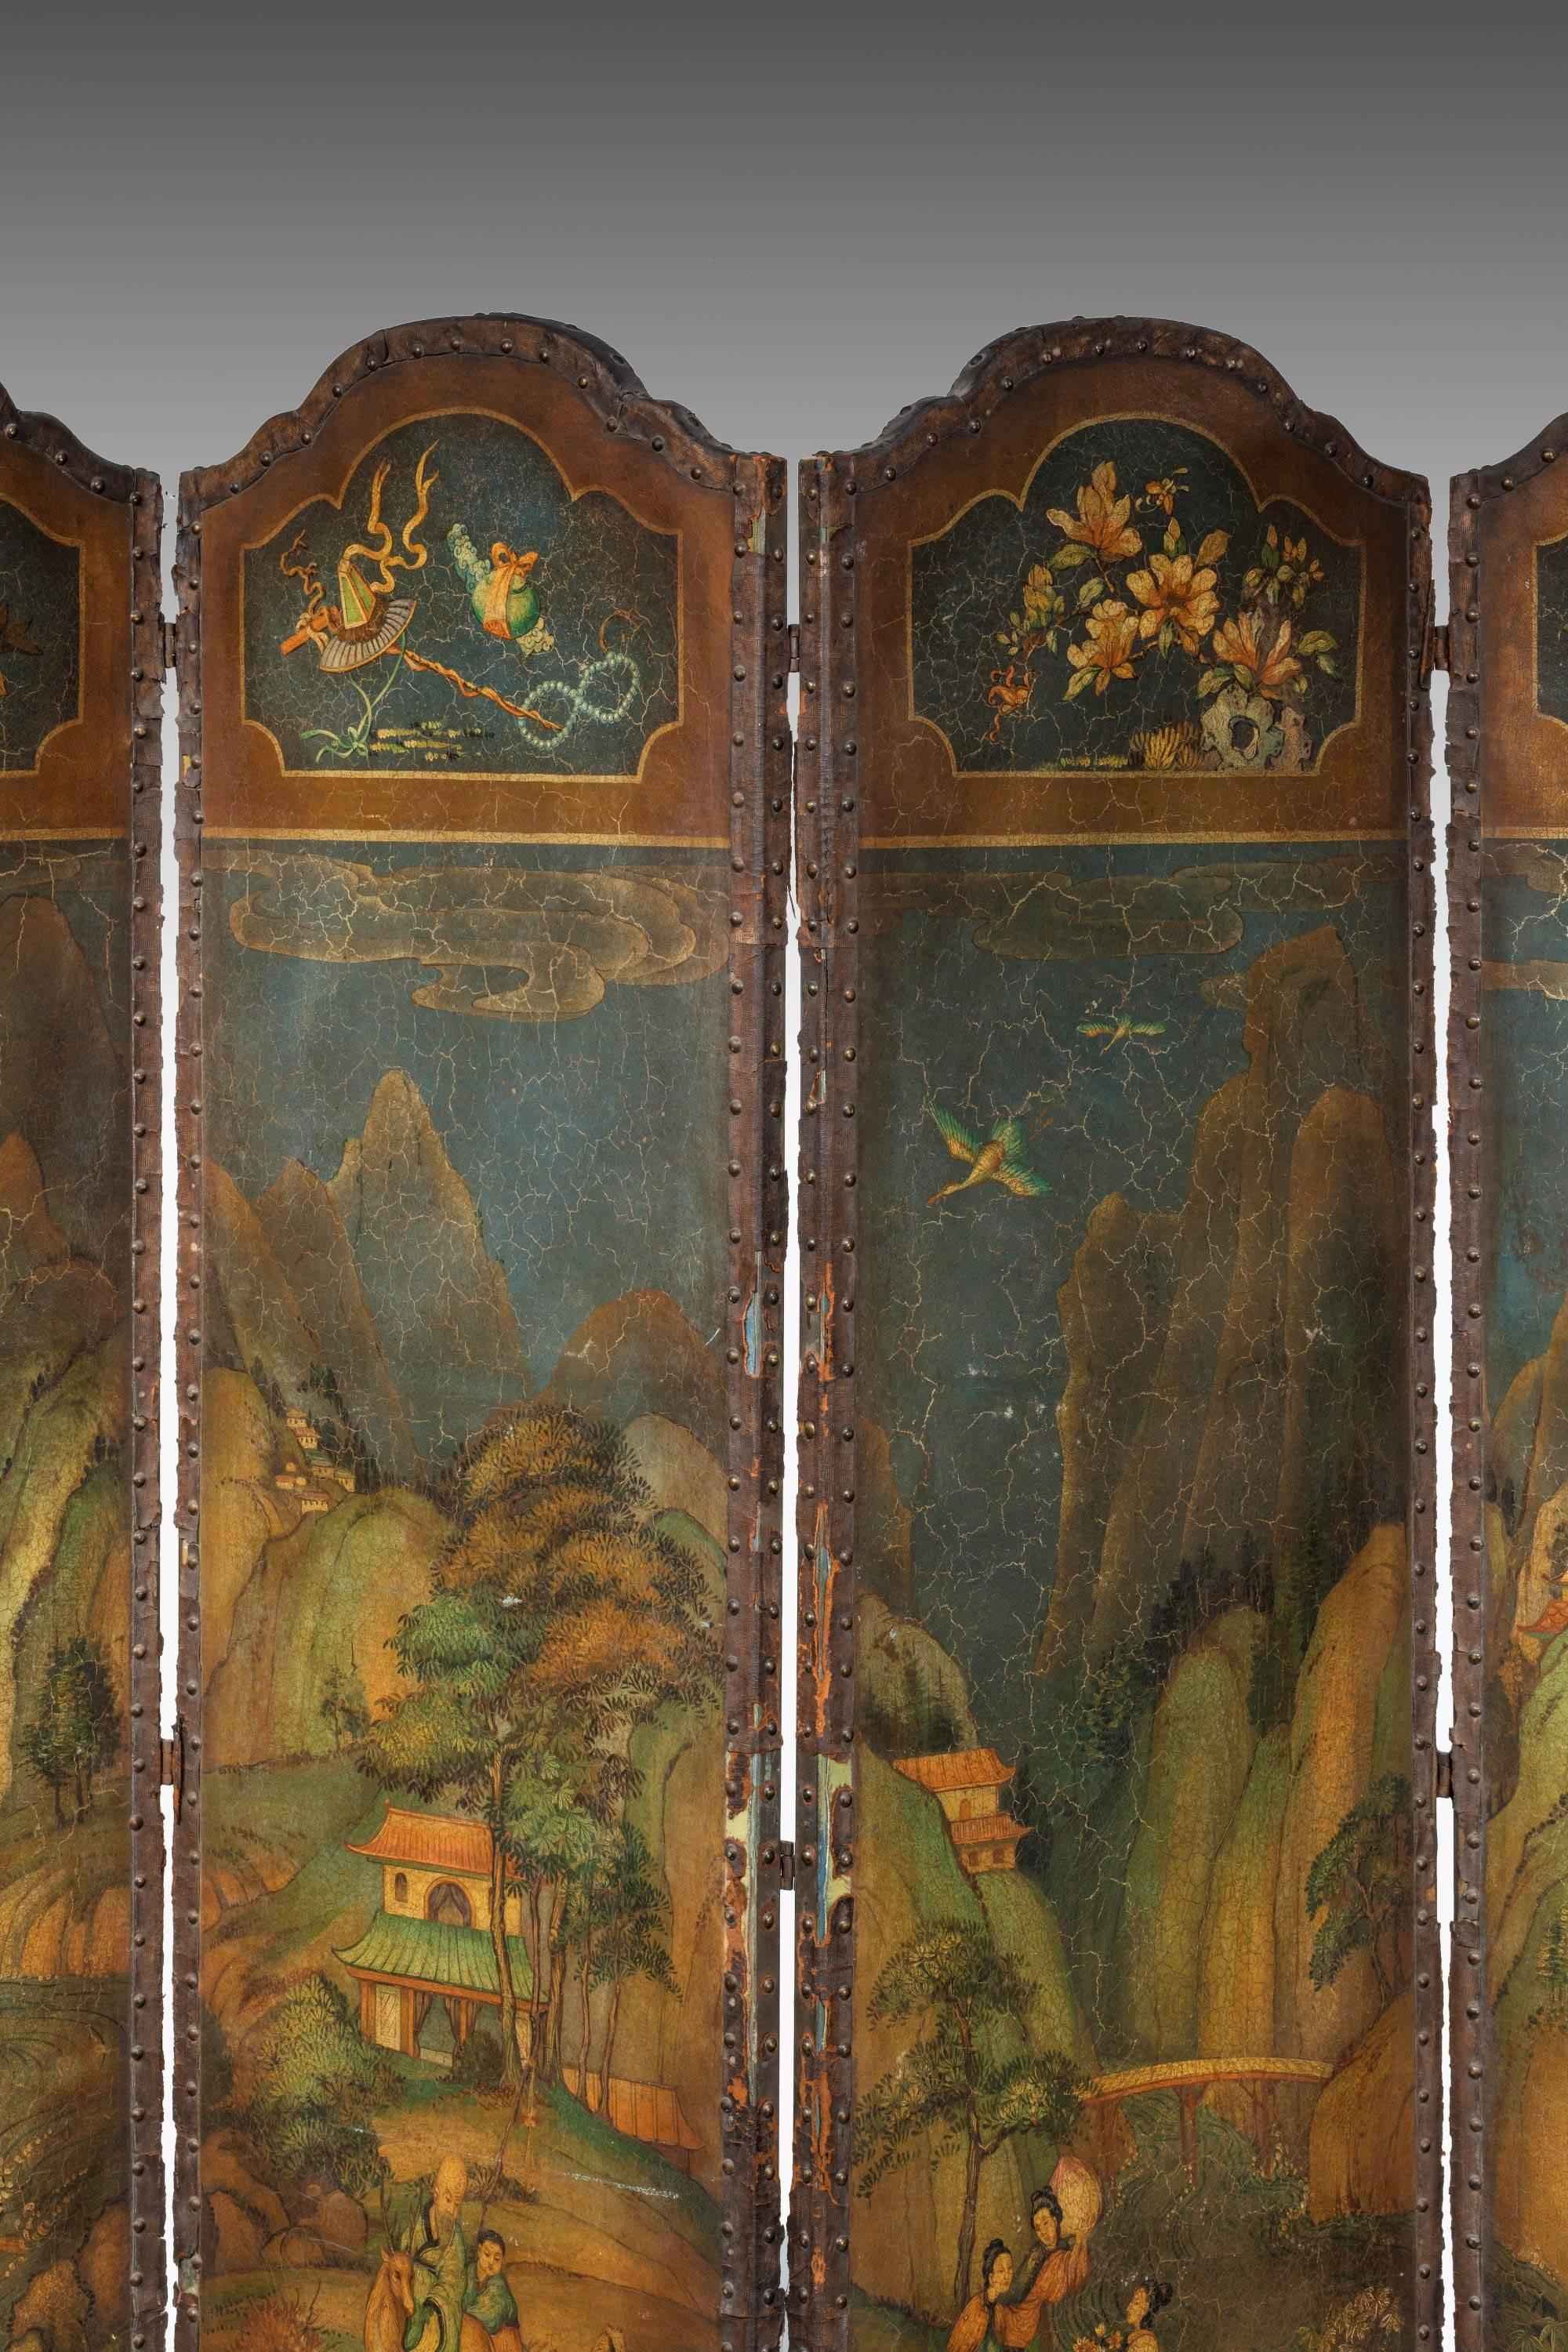 An unusual five-fold screen on canvas ground. The central panels of garden scenes with figures, exotic birds and foliage. Overall somewhat tired now.